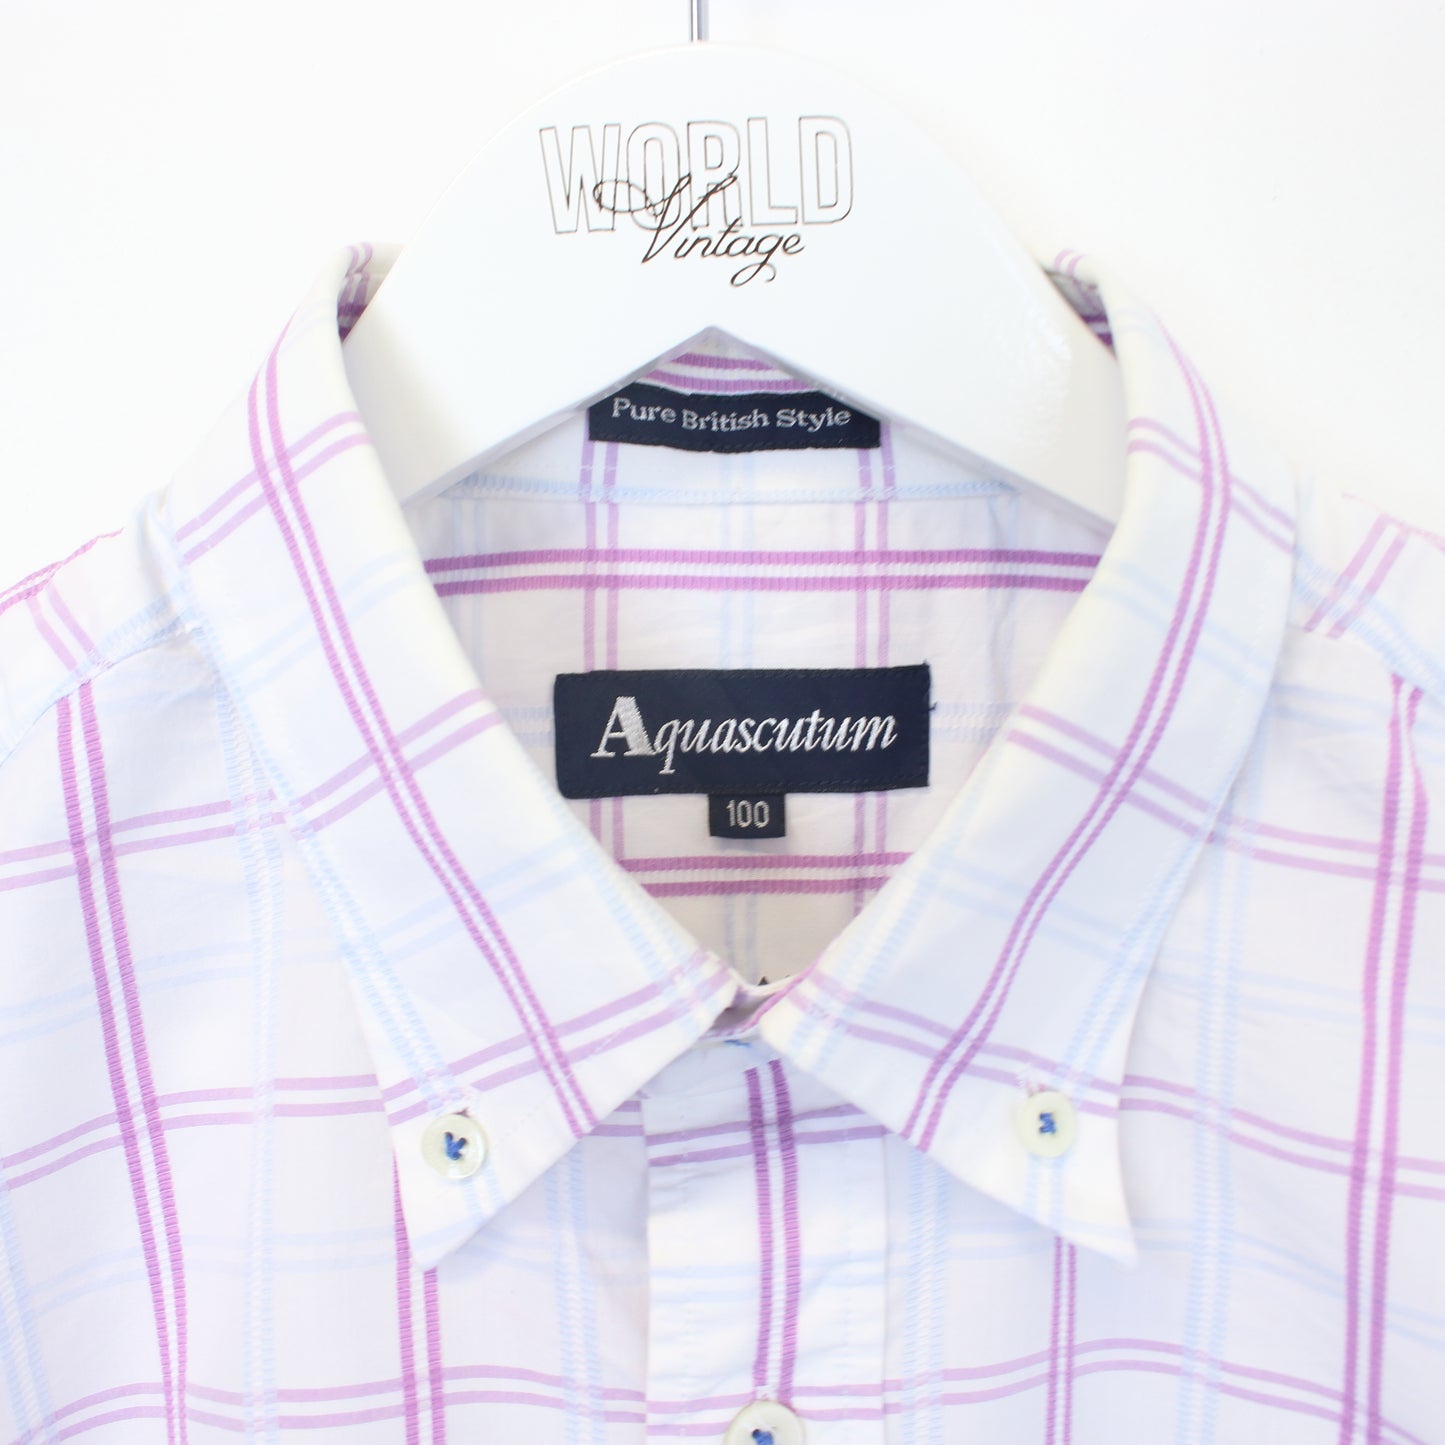 Vintage Aquascutum checked shirt in purple and white. Best fits M